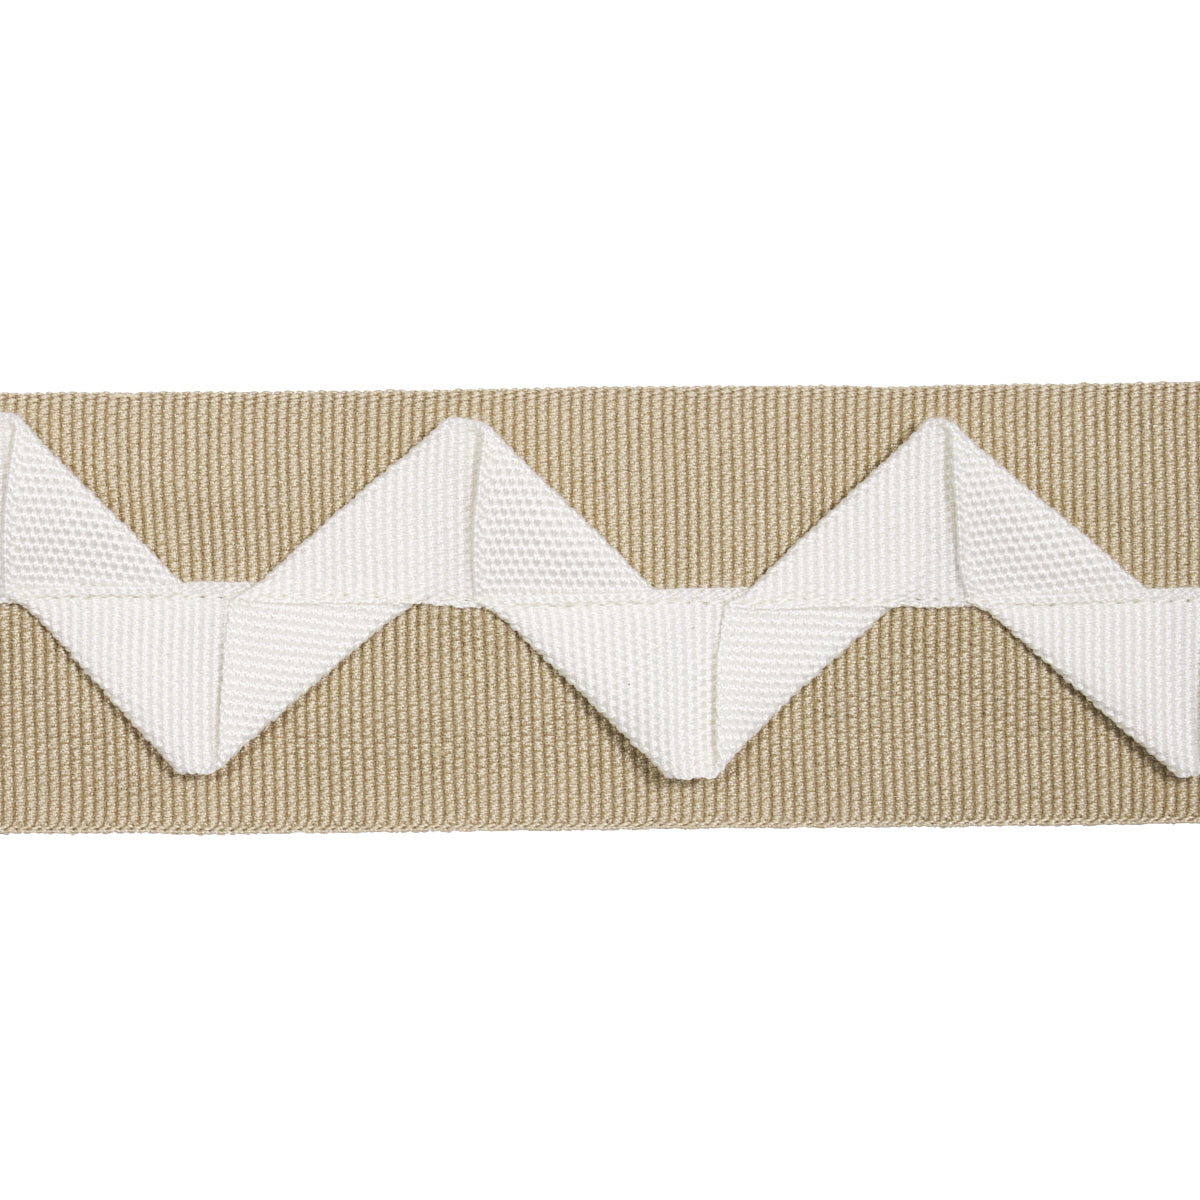 LAZARE APPLIQUÉ TAPE | IVORY ON NATURAL